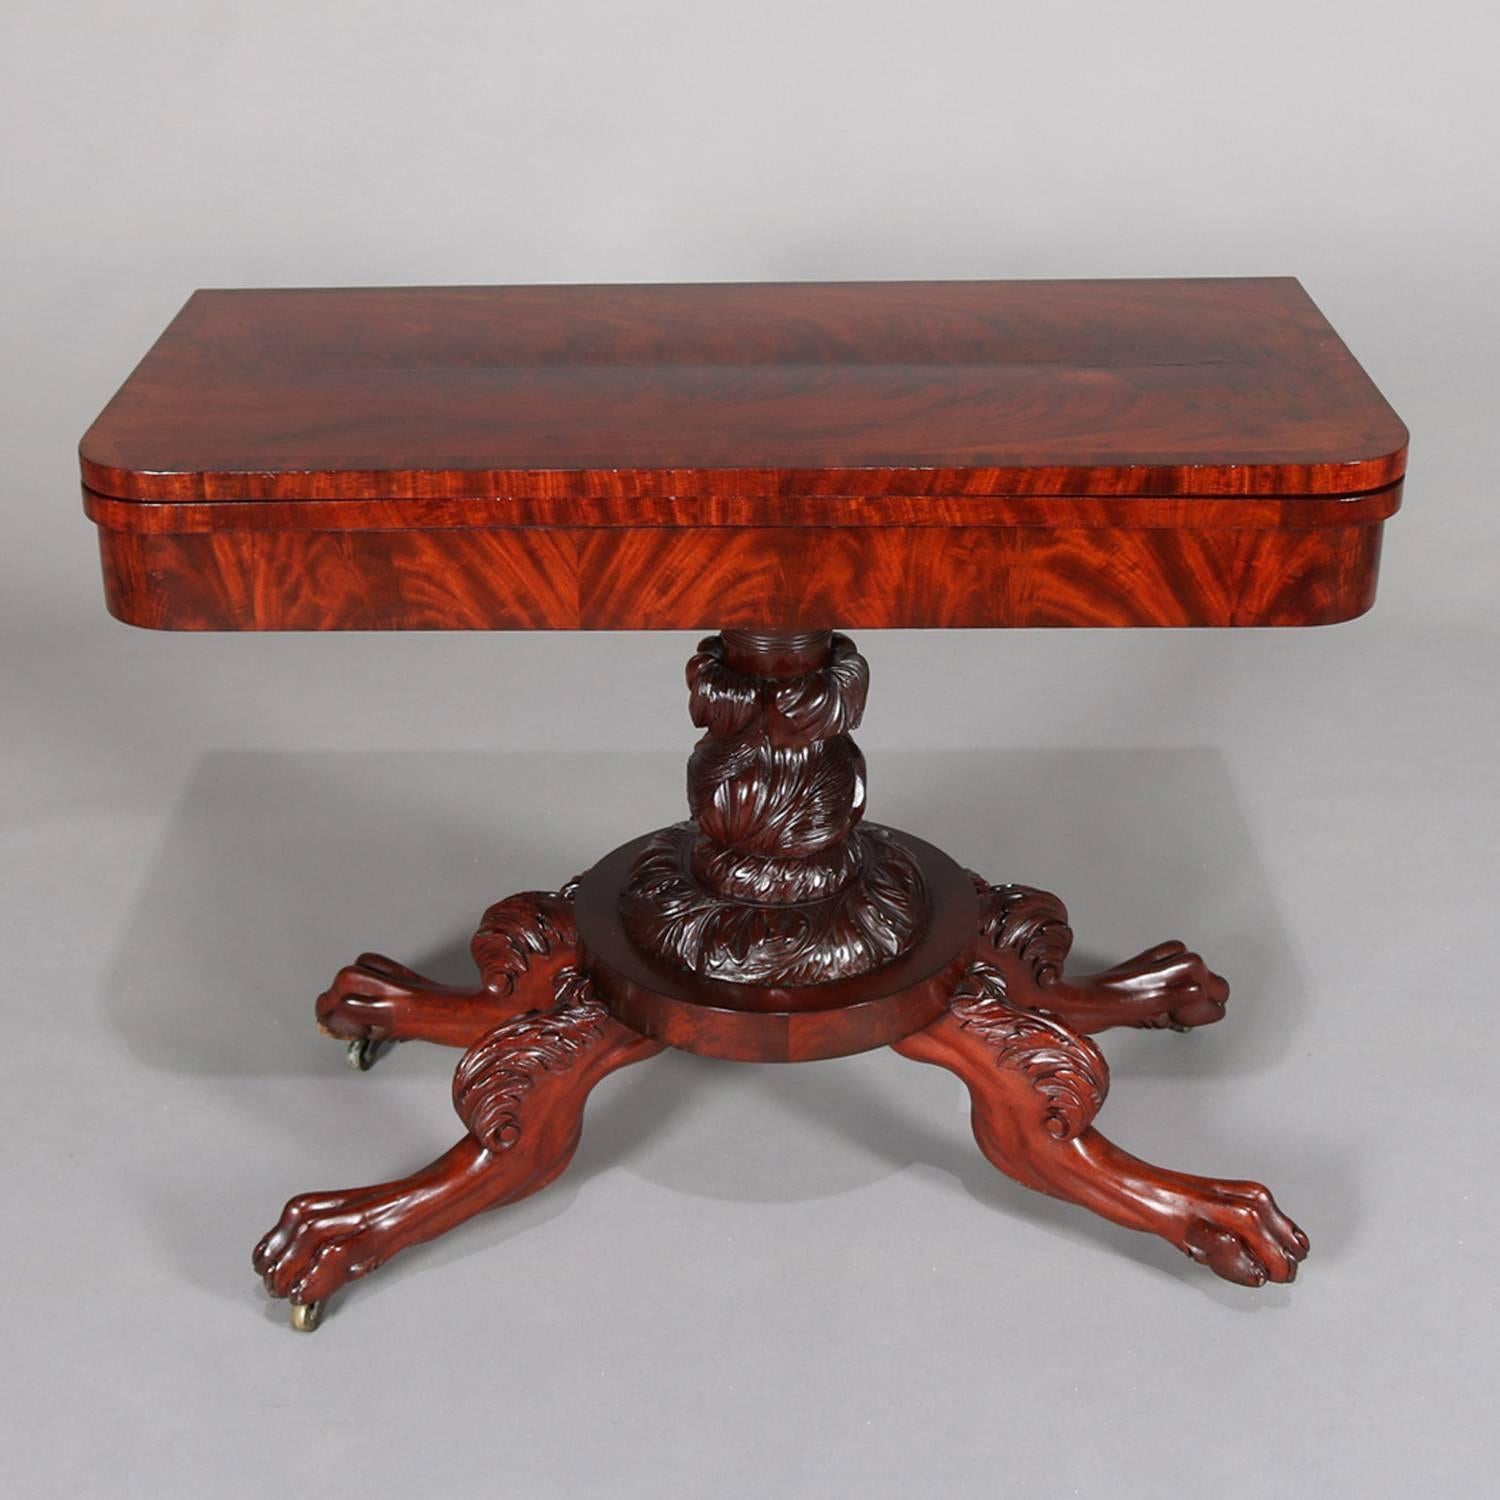 Antique Quervelle School American Empire flame mahogany game table features deeply striated flame mahogany with hinged swivel game top above heavily carved Classical foliate plinth and raised on finely detailed lion legs terminating in claw feet and